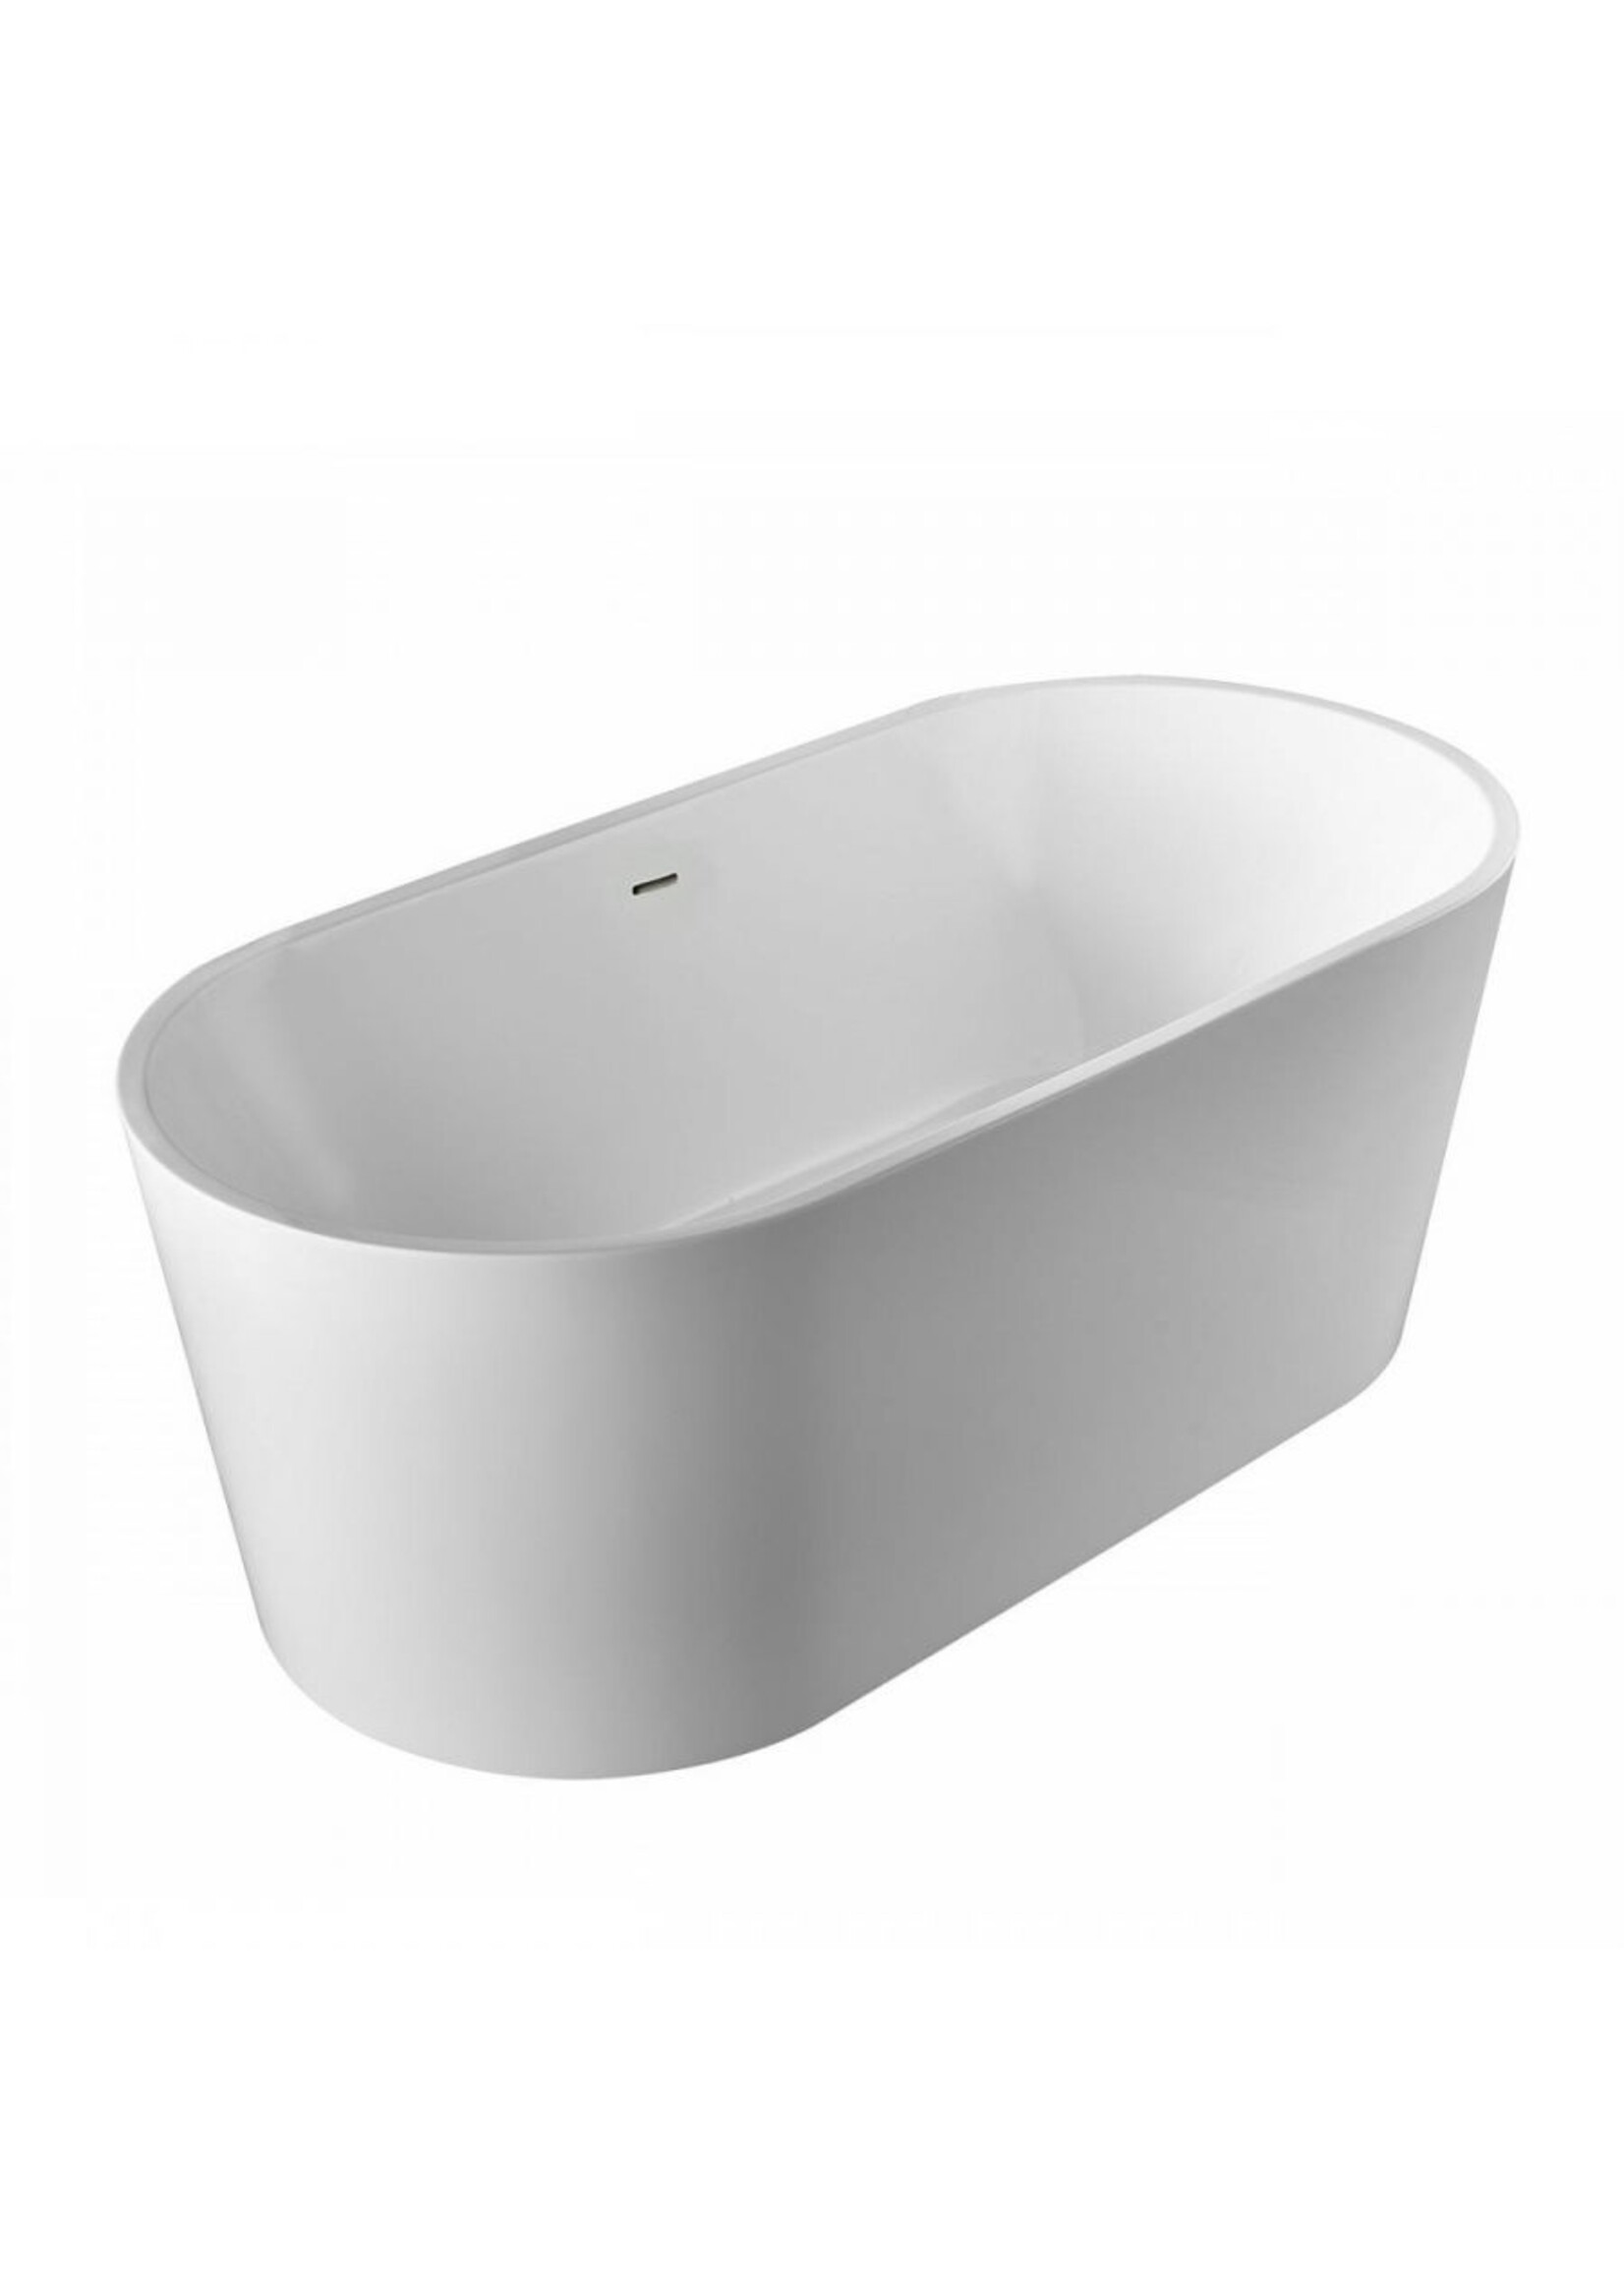 MaidStone Arlo Acrylic Contemporary Double Ended Tub - No Faucet Drillings